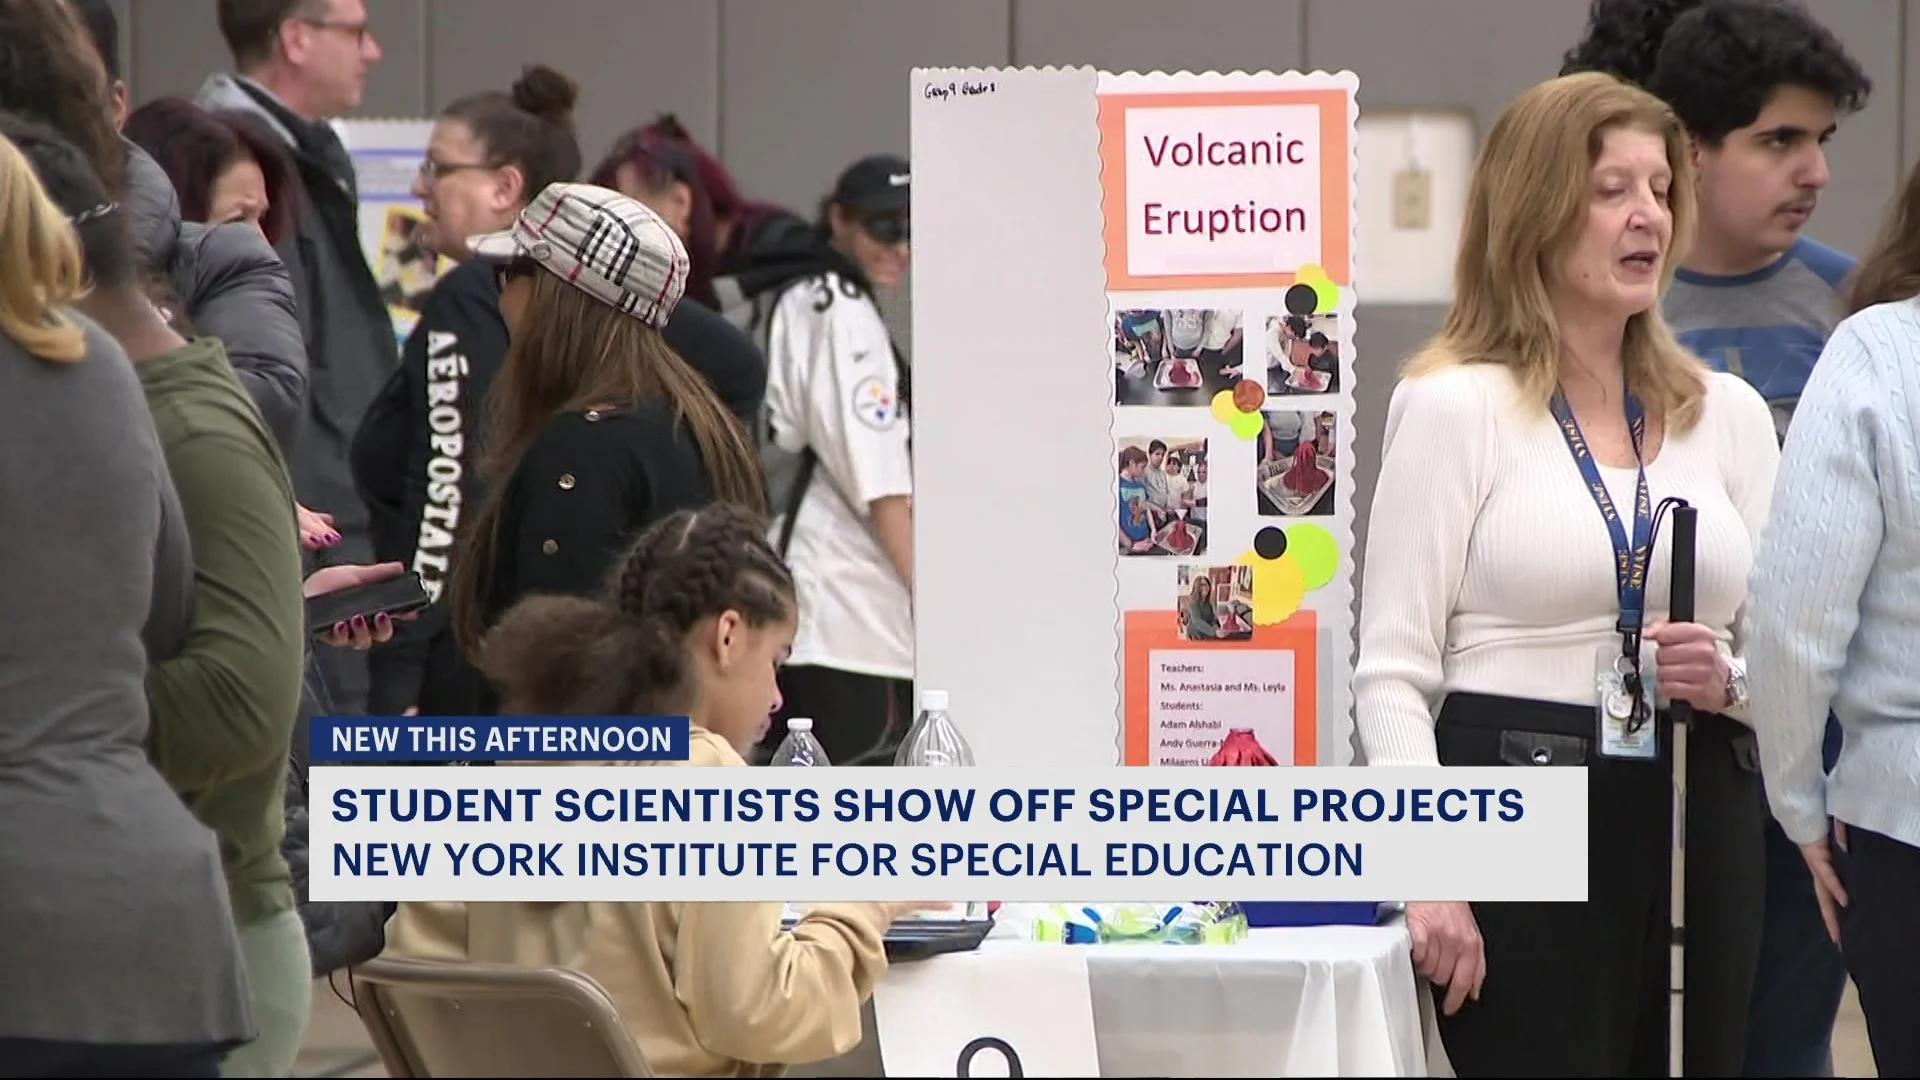 Shining Bright: New York City Science Fair Celebrates Visually Impaired Students’ Scientific Achievements